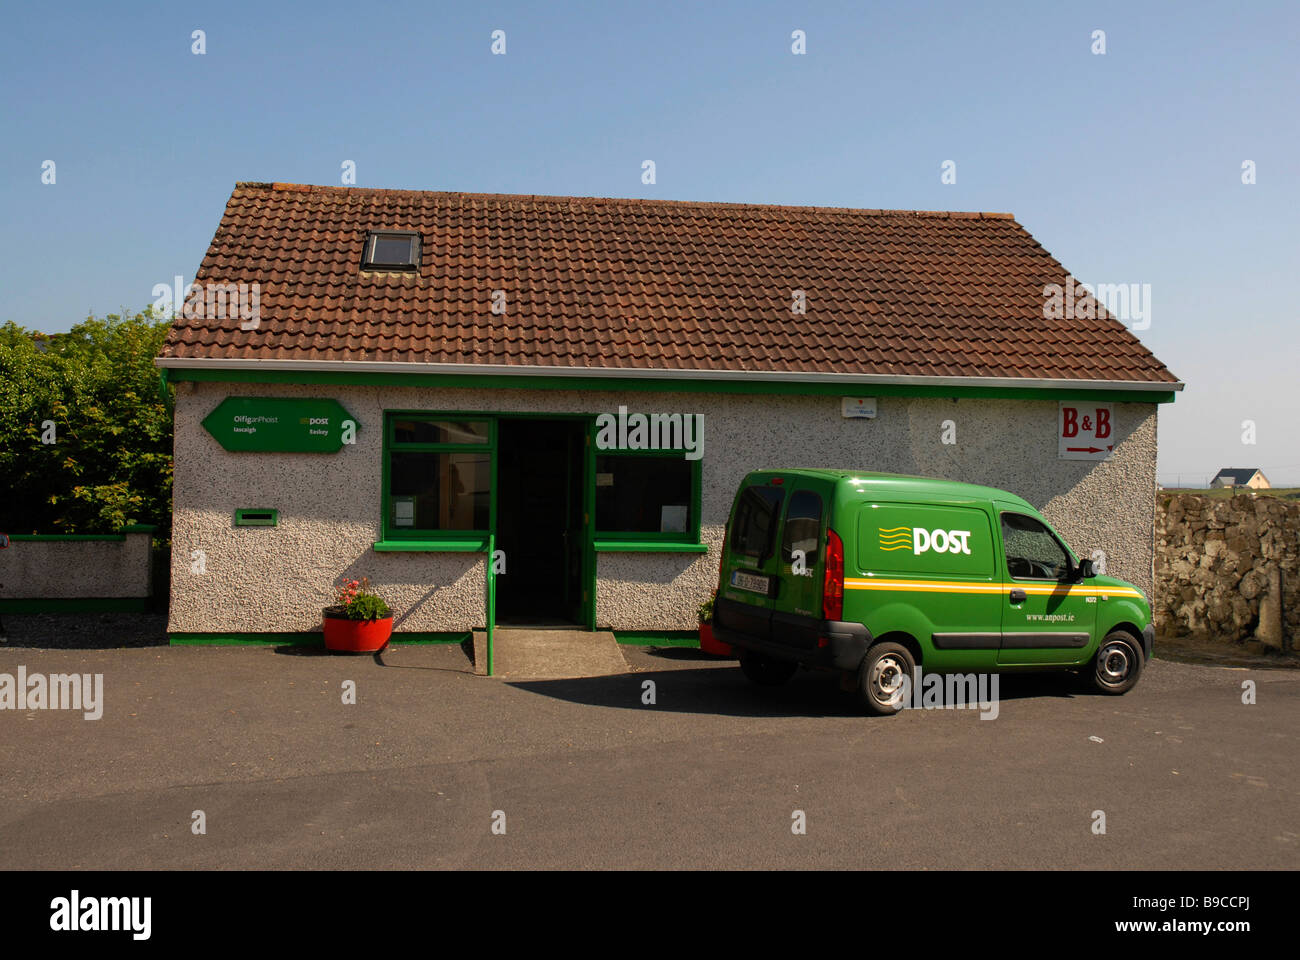 Post Van Ireland High Resolution Stock Photography and Images - Alamy